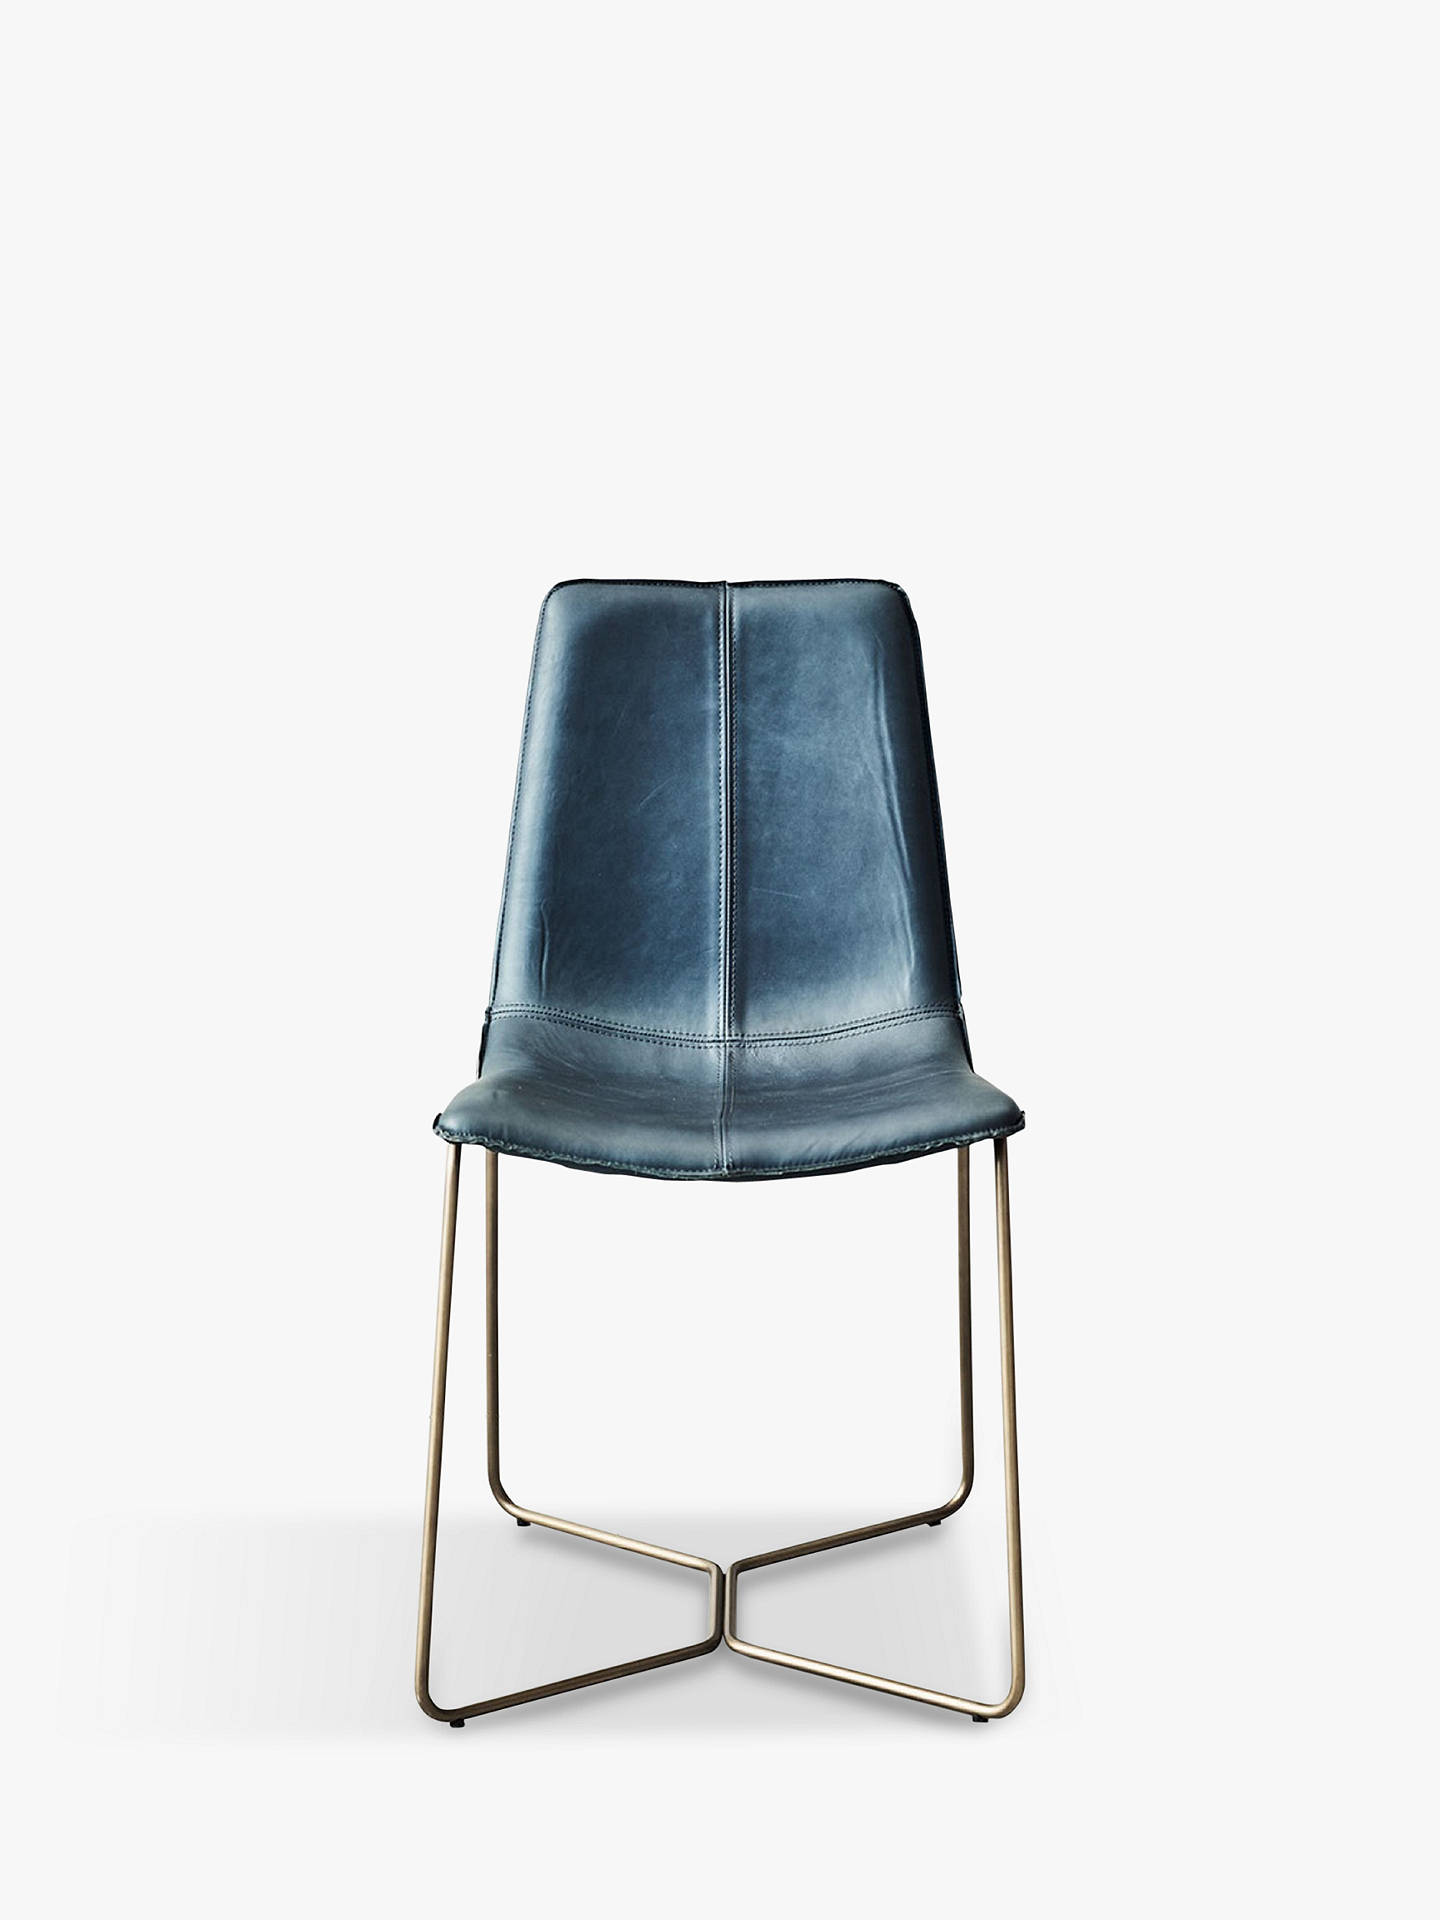 West Elm Slope Leather Dining Chair Navy At John Lewis Partners